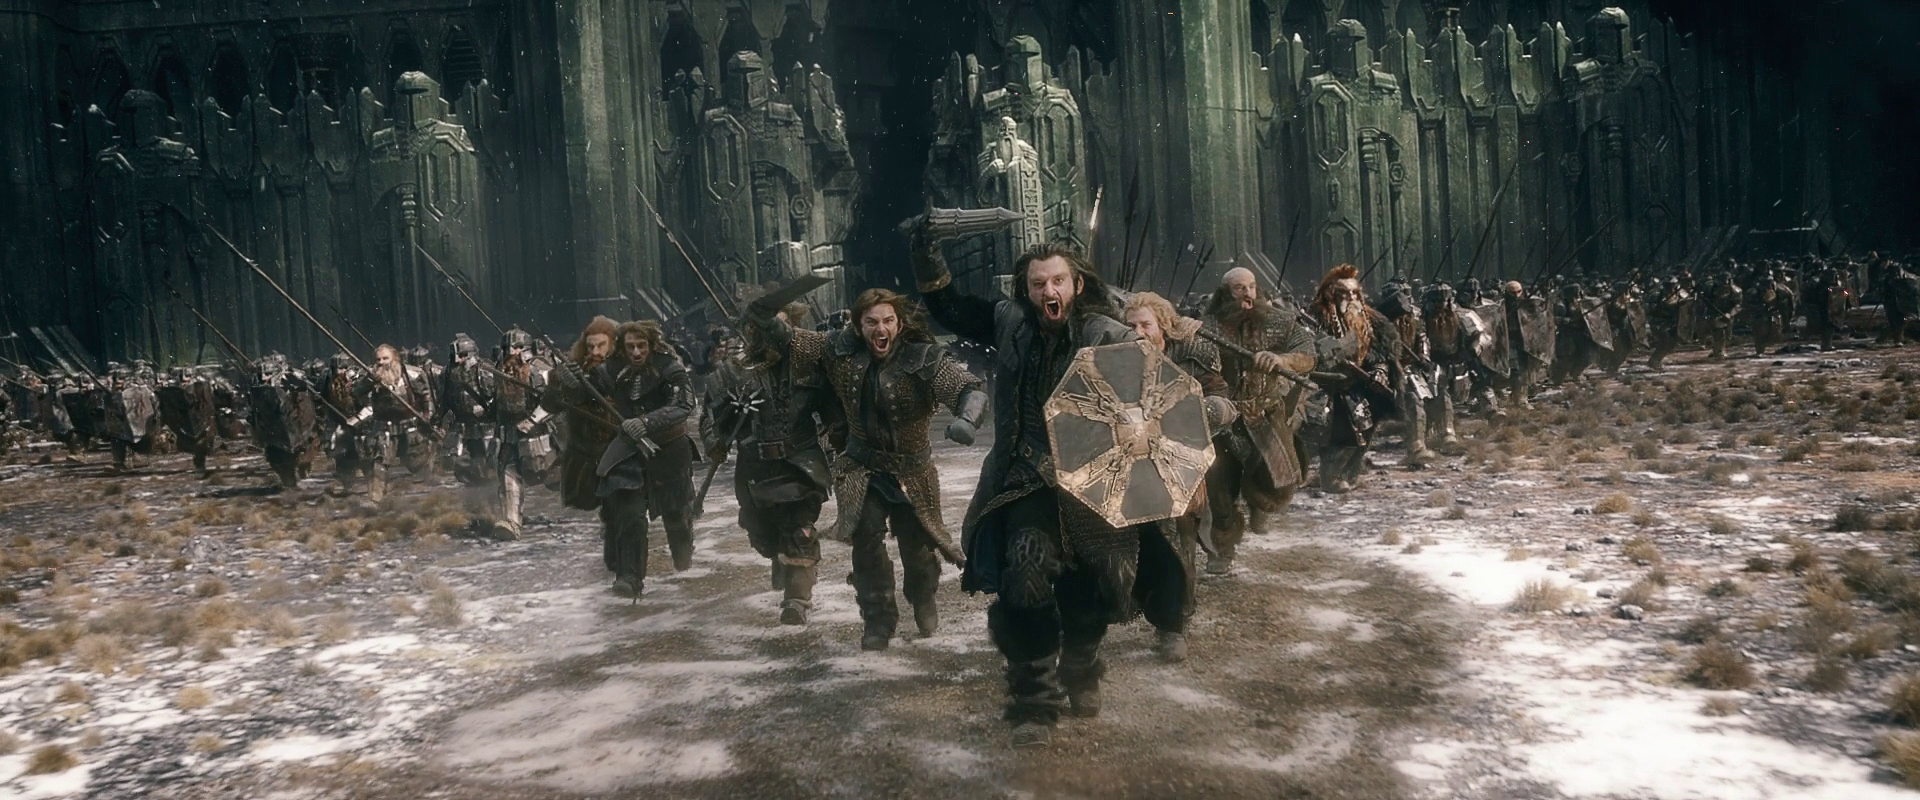  Thorin leads the charge in Battle of the Five Armies